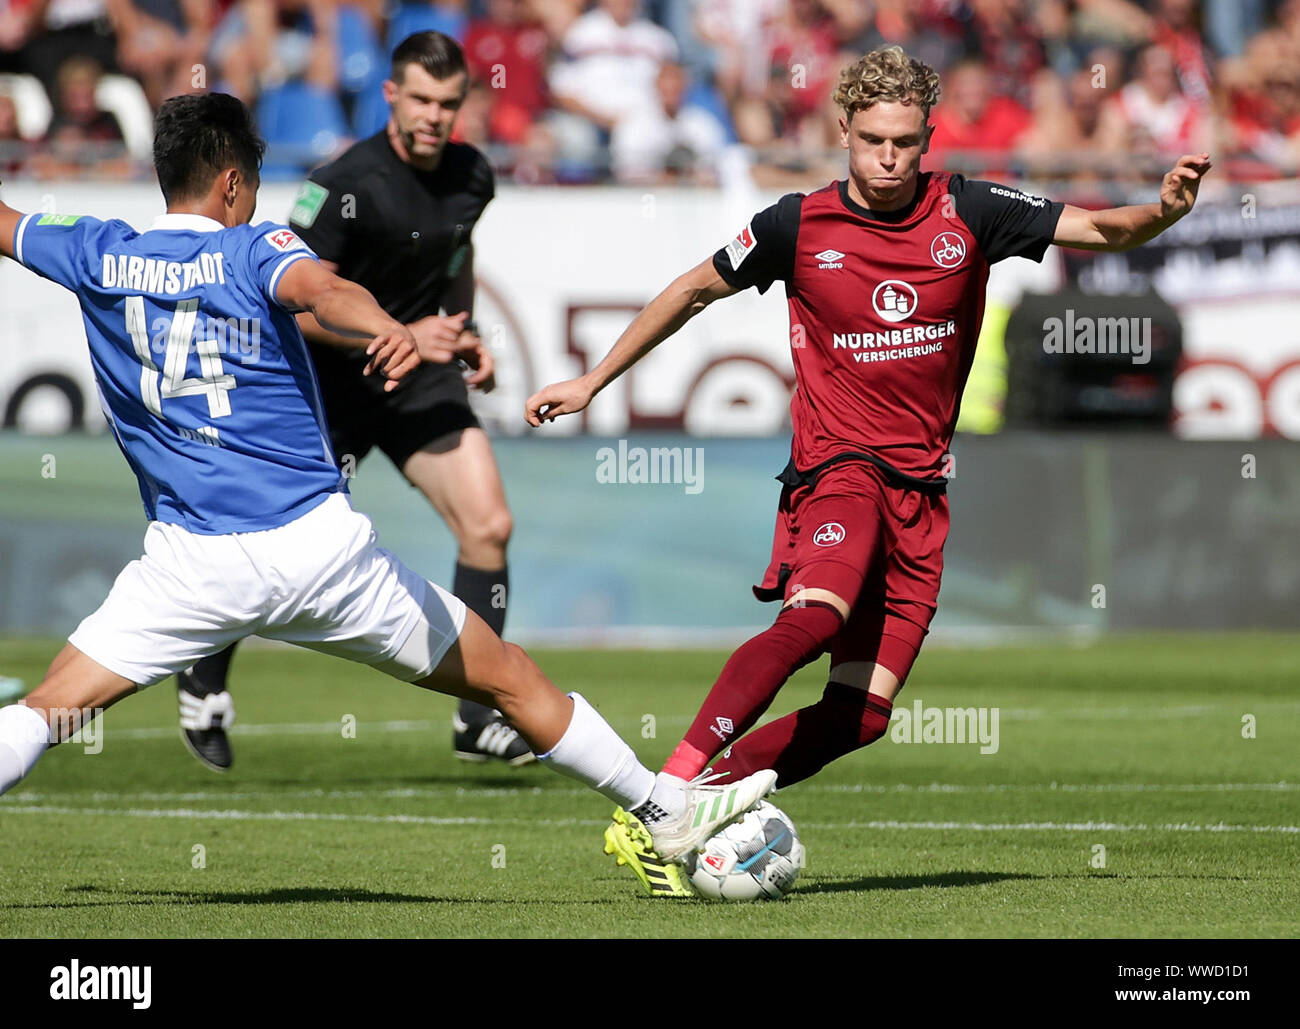 Darmstadt, Germany. 15th Sep, 2019. Soccer: 2nd Bundesliga, Darmstadt 98 - 1st FC Nuremberg, 6th matchday. The Darmstadt Seung-ho Paik (L) in a duel with Robin Hack (R) from Nuremberg. Credit: Hasan Bratic/dpa - IMPORTANT NOTE: In accordance with the requirements of the DFL Deutsche Fußball Liga or the DFB Deutscher Fußball-Bund, it is prohibited to use or have used photographs taken in the stadium and/or the match in the form of sequence images and/or video-like photo sequences./dpa/Alamy Live News Stock Photo